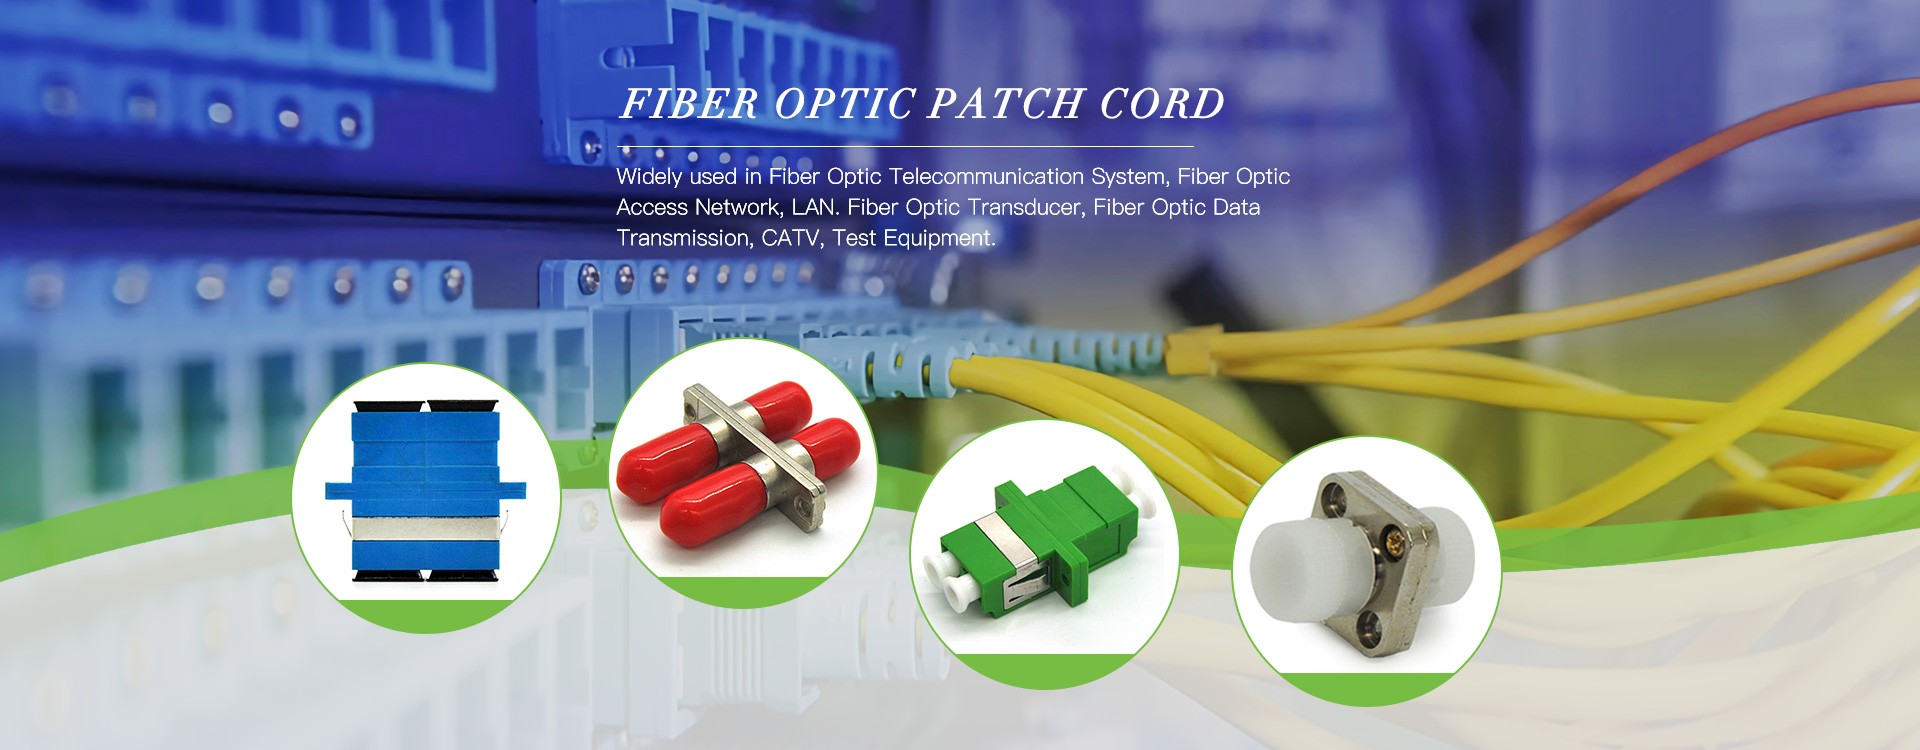 Factory Directly Supply Accurate Fiber Optic Patch Cord Thailand TOT Supplier